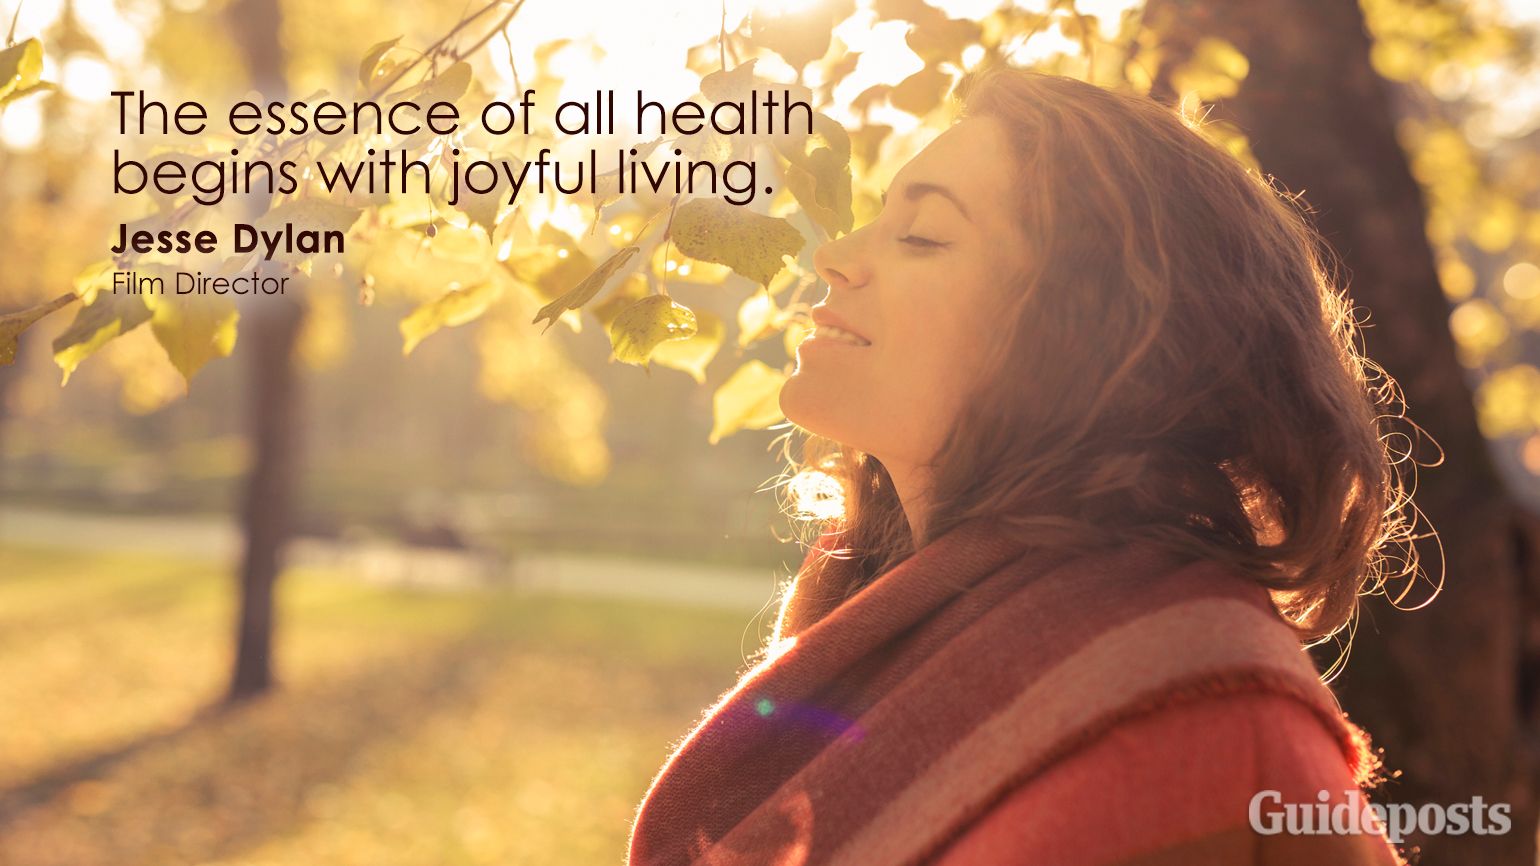 The essence of all health begins with joyful living.